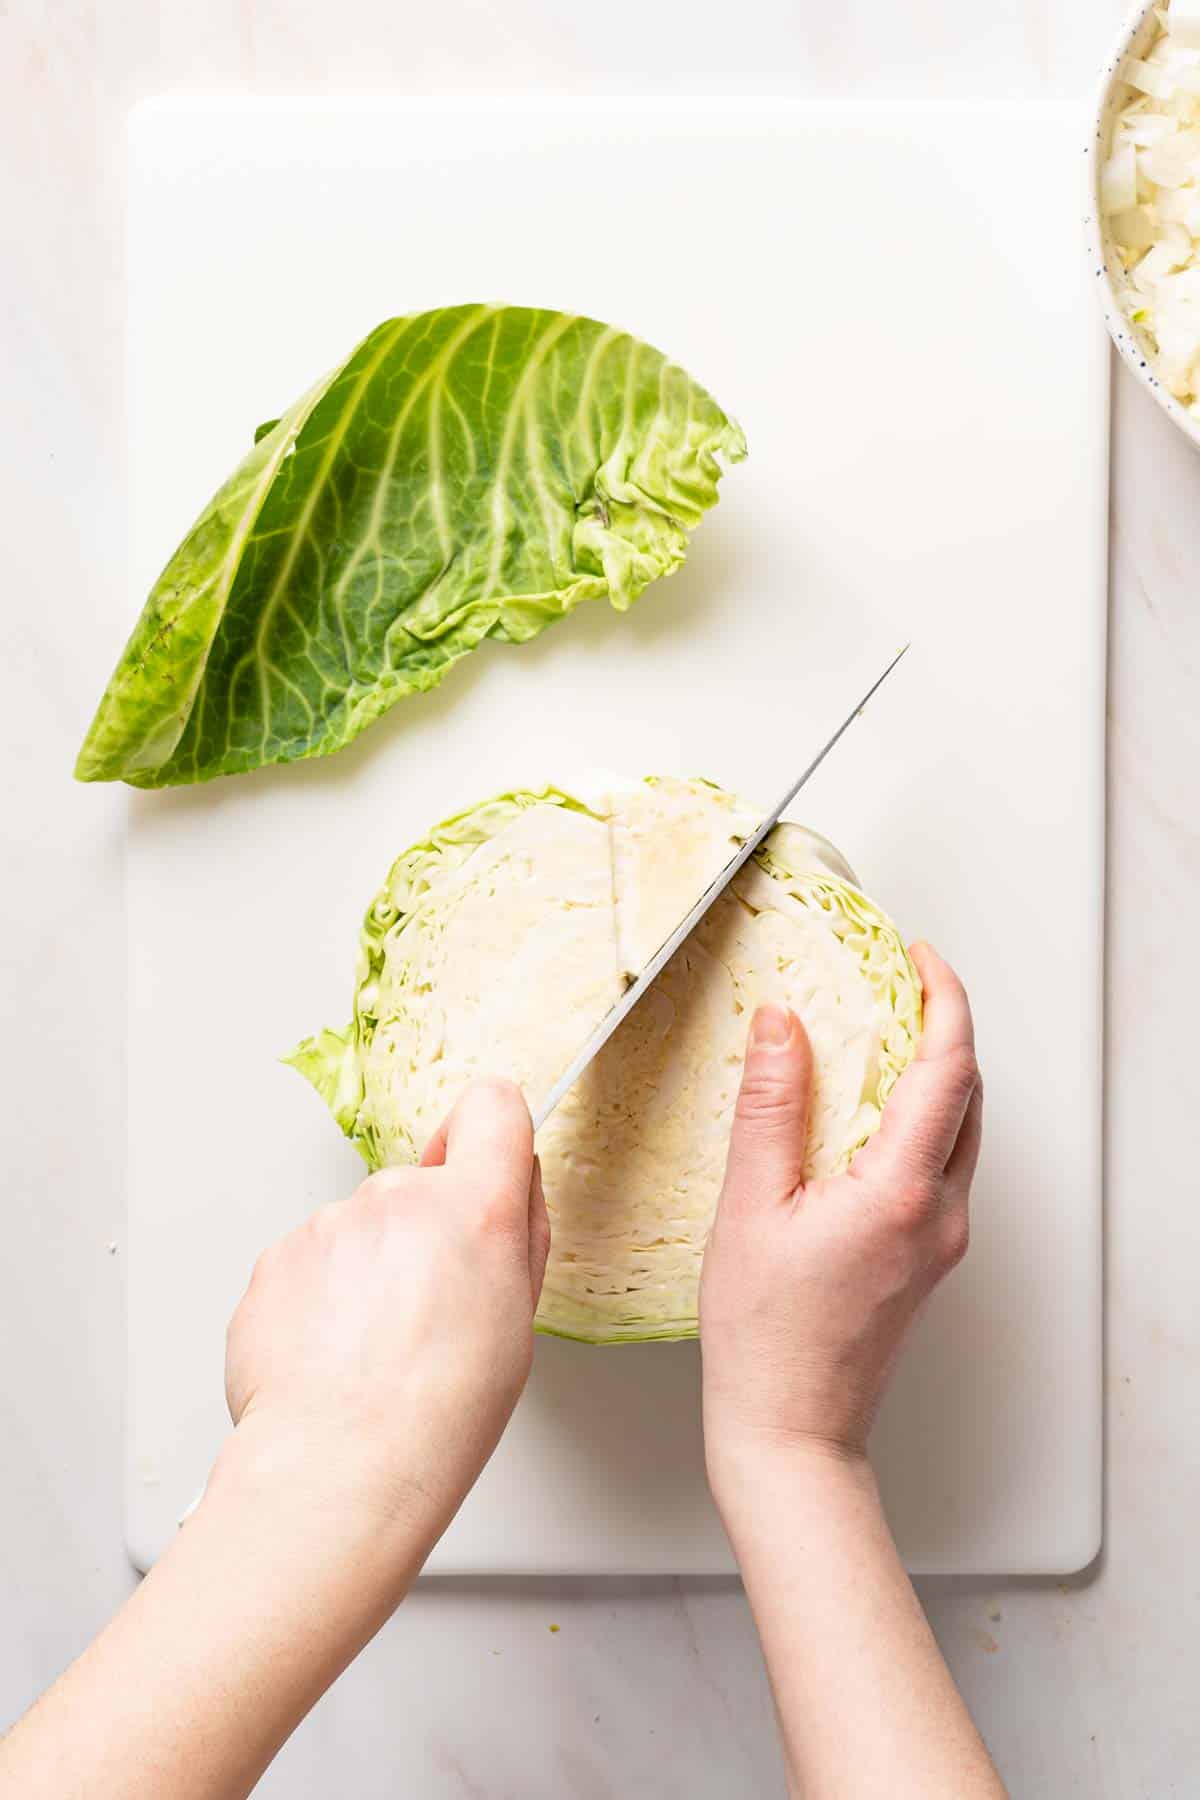 core being cut out of half cabbage.